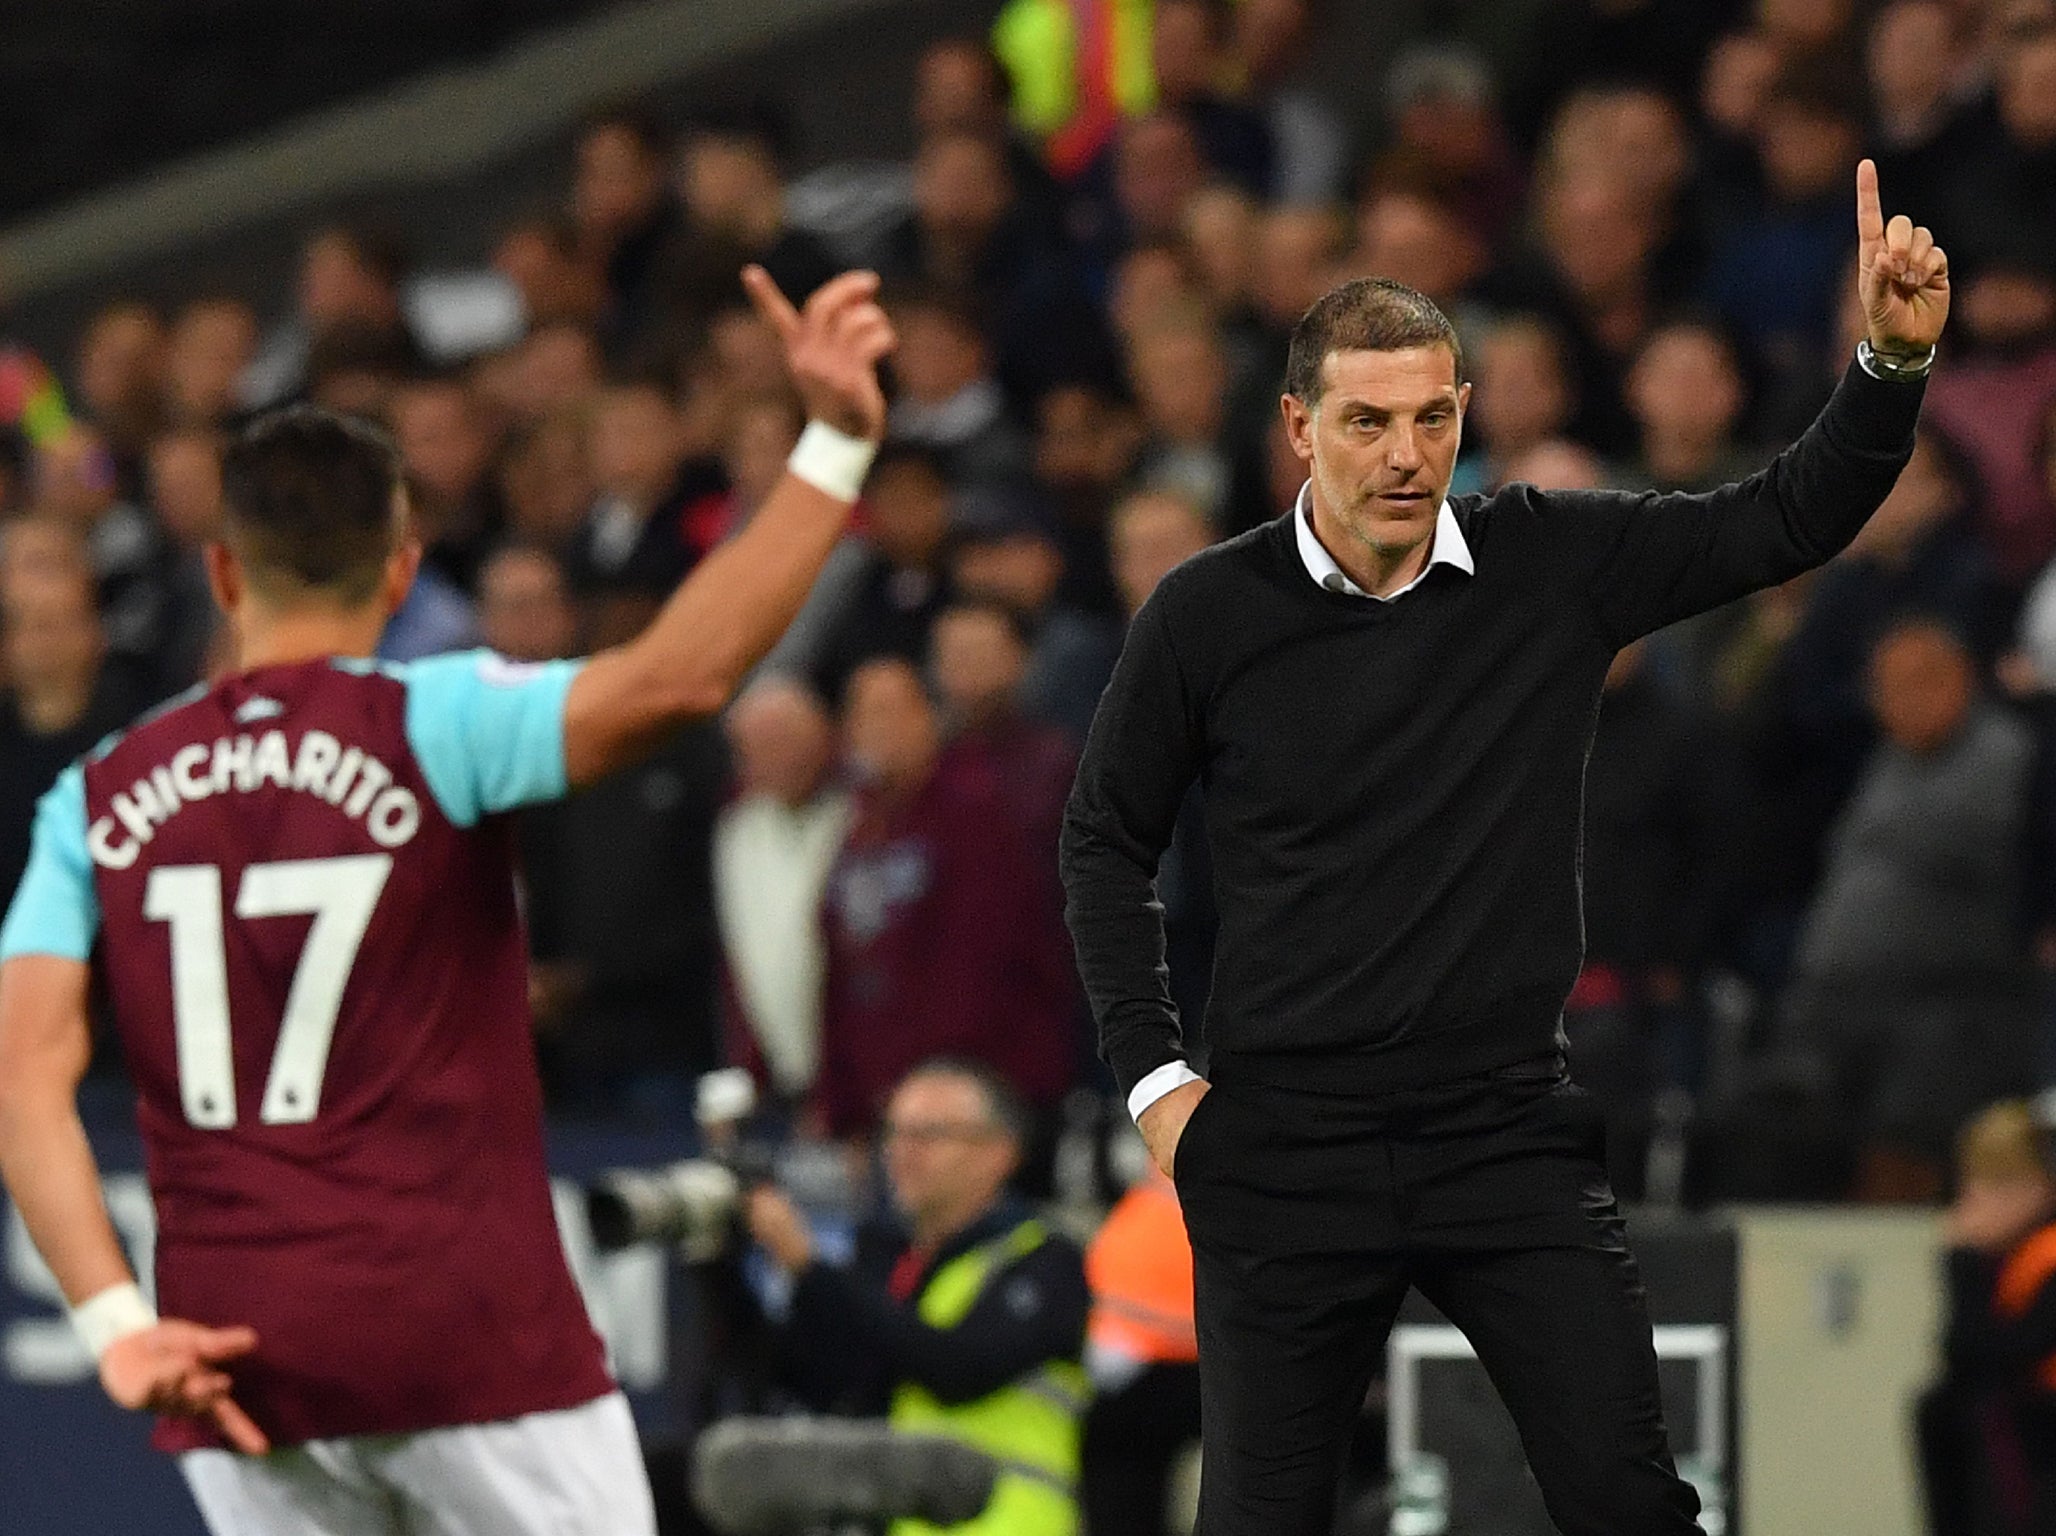 The win eases the pressure on Bilic